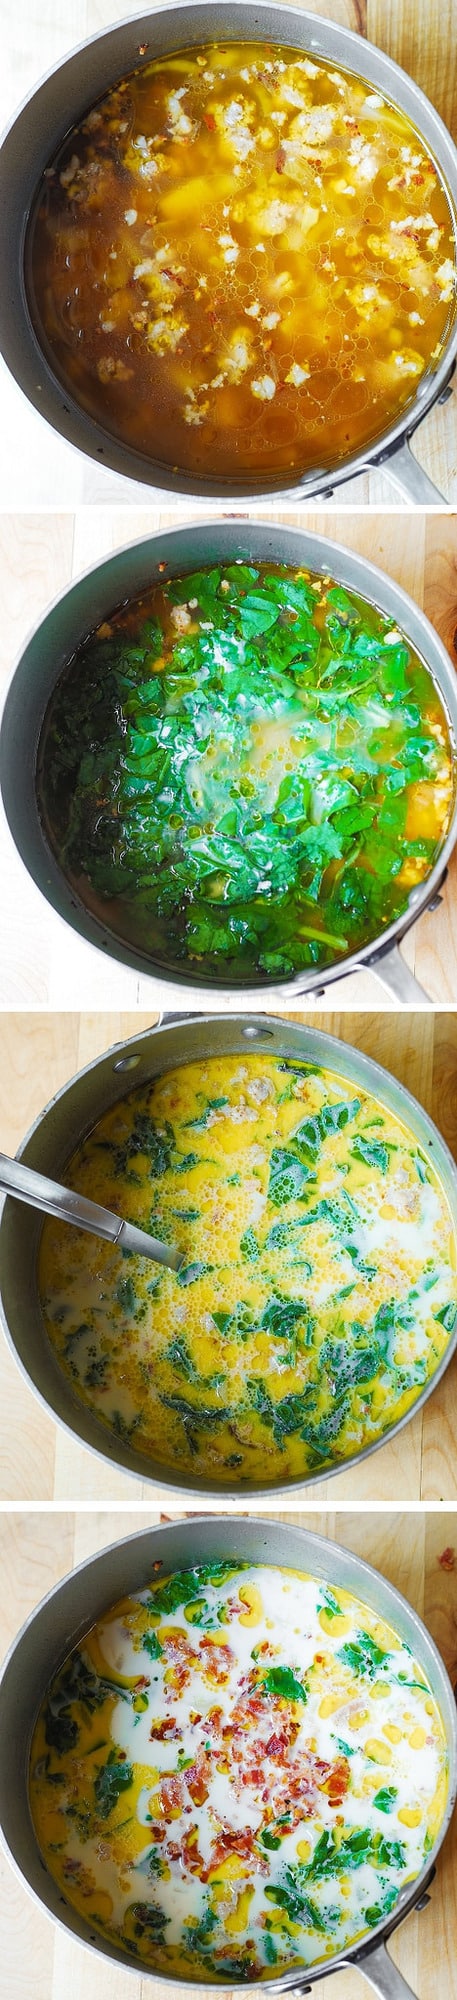 collage of step-by-step photos for major steps of cooking Zuppa Toscana Soup